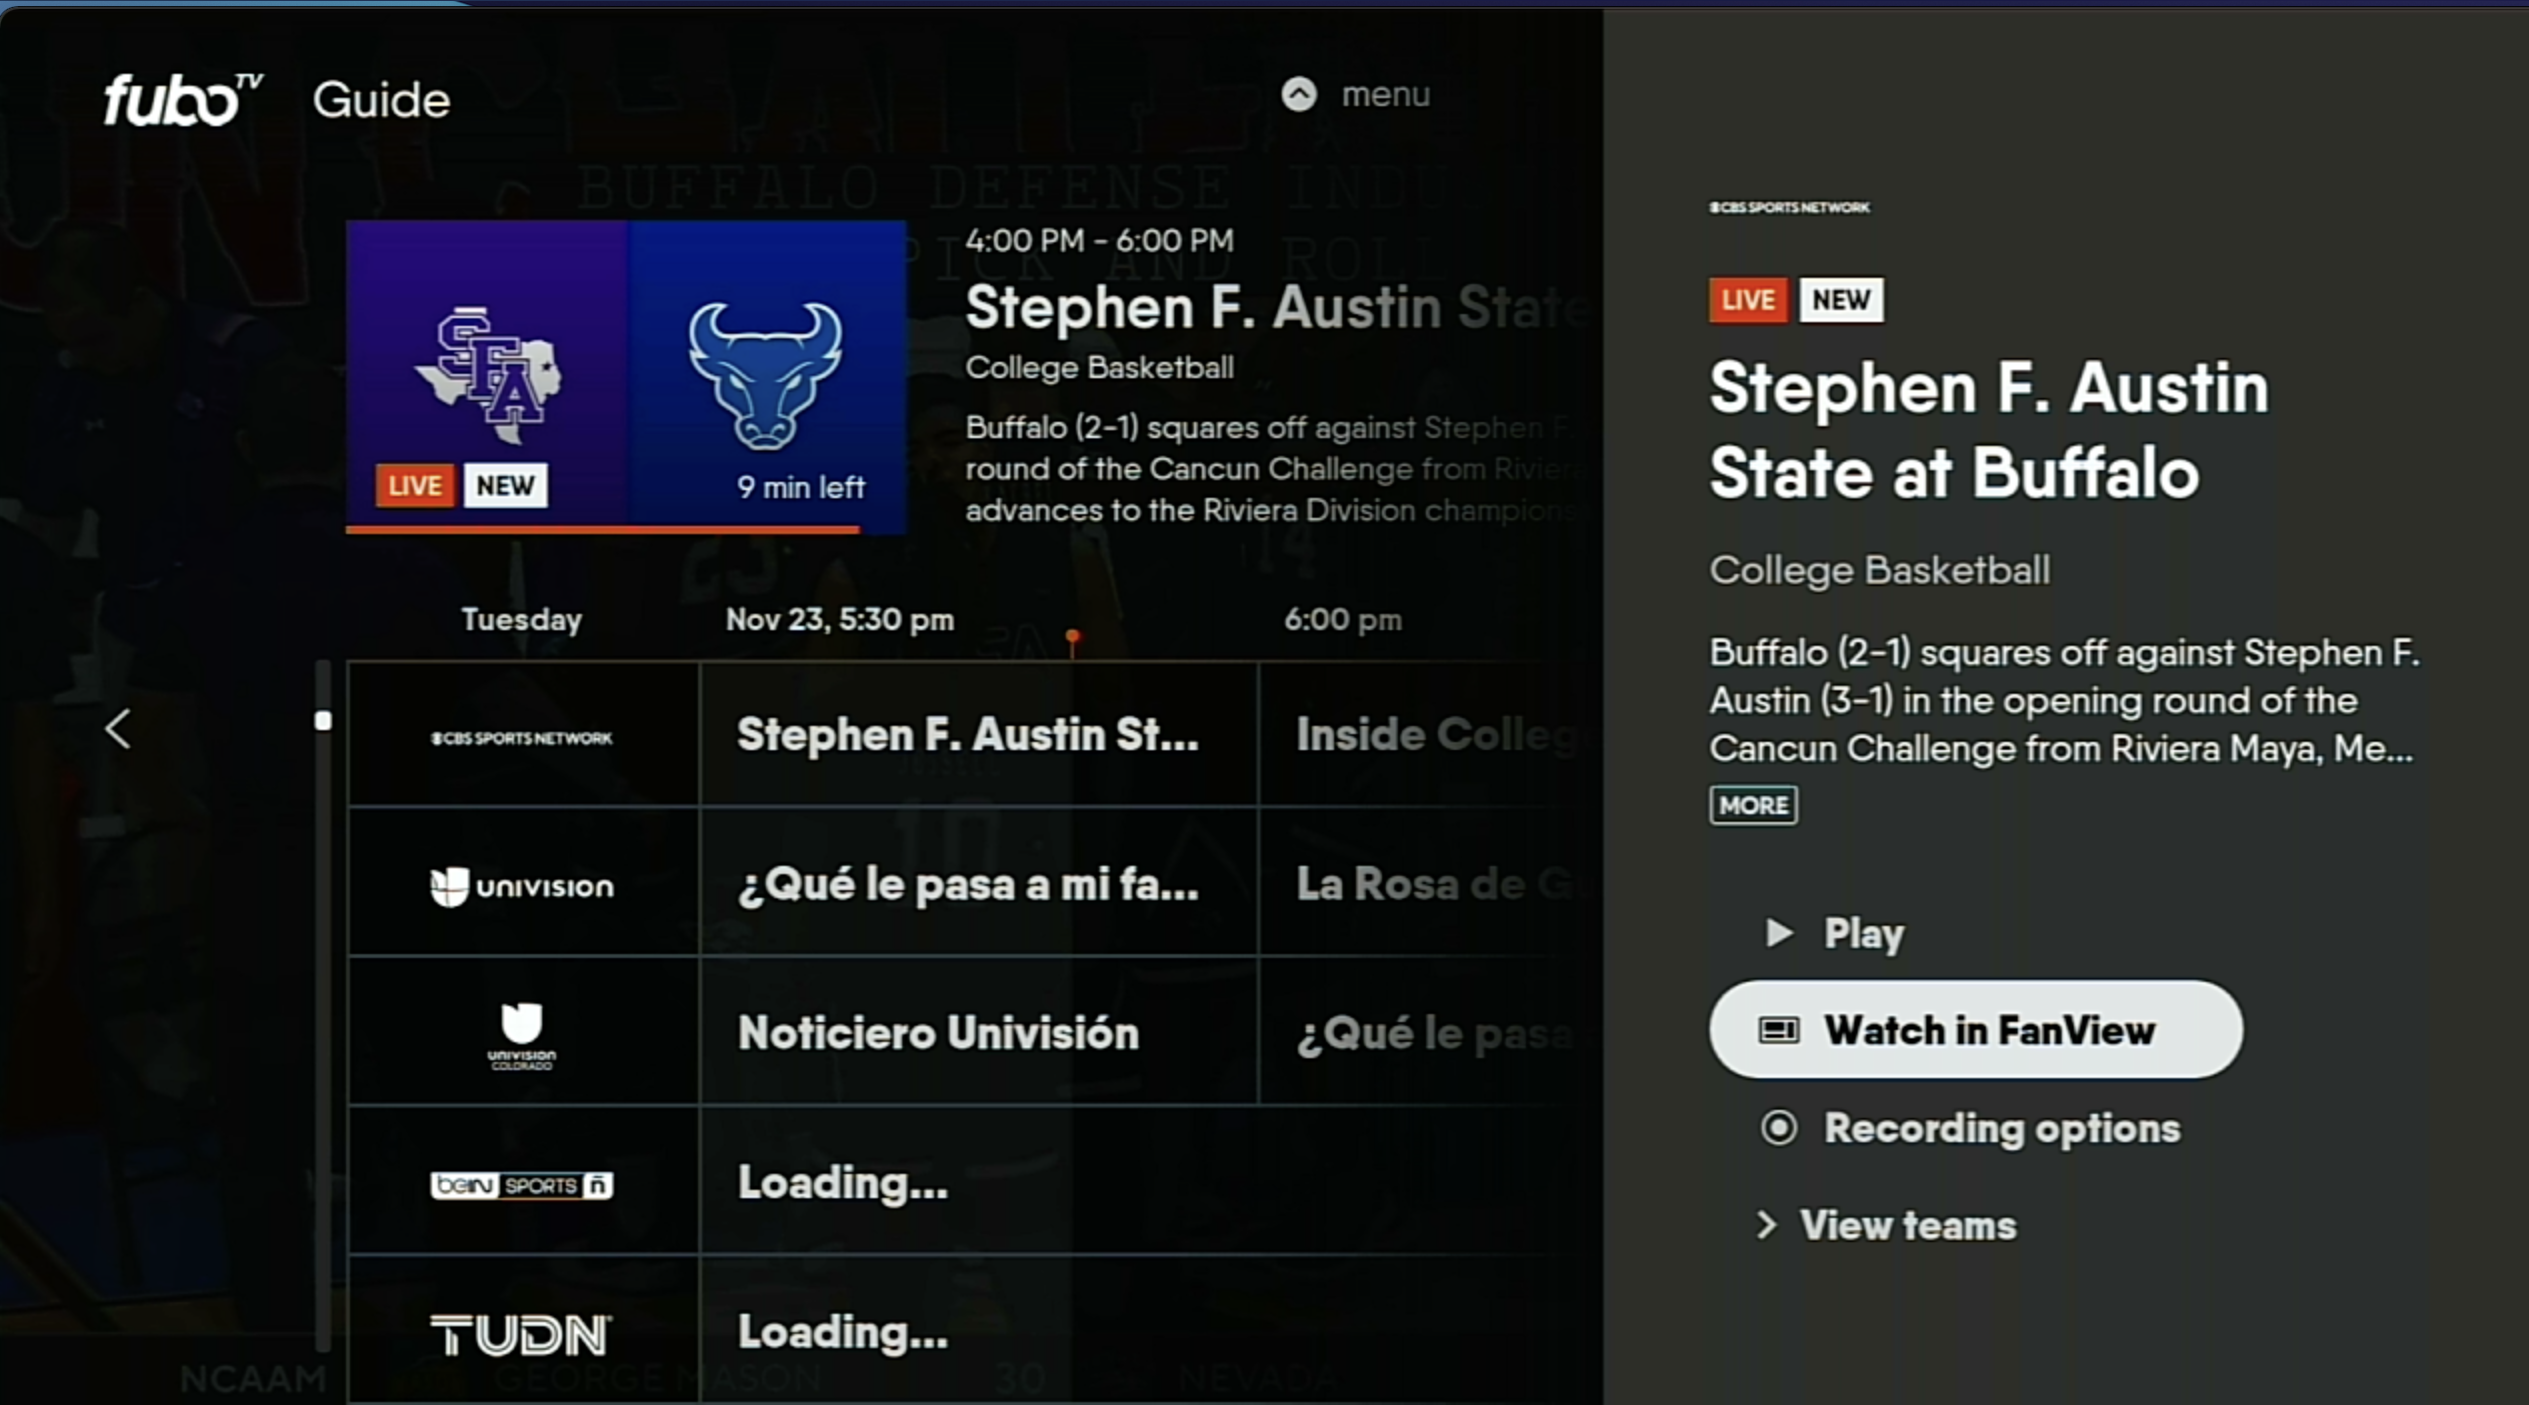 Program information screen for the FuboTV app on Roku with WATCH IN FANVIEW highlighted